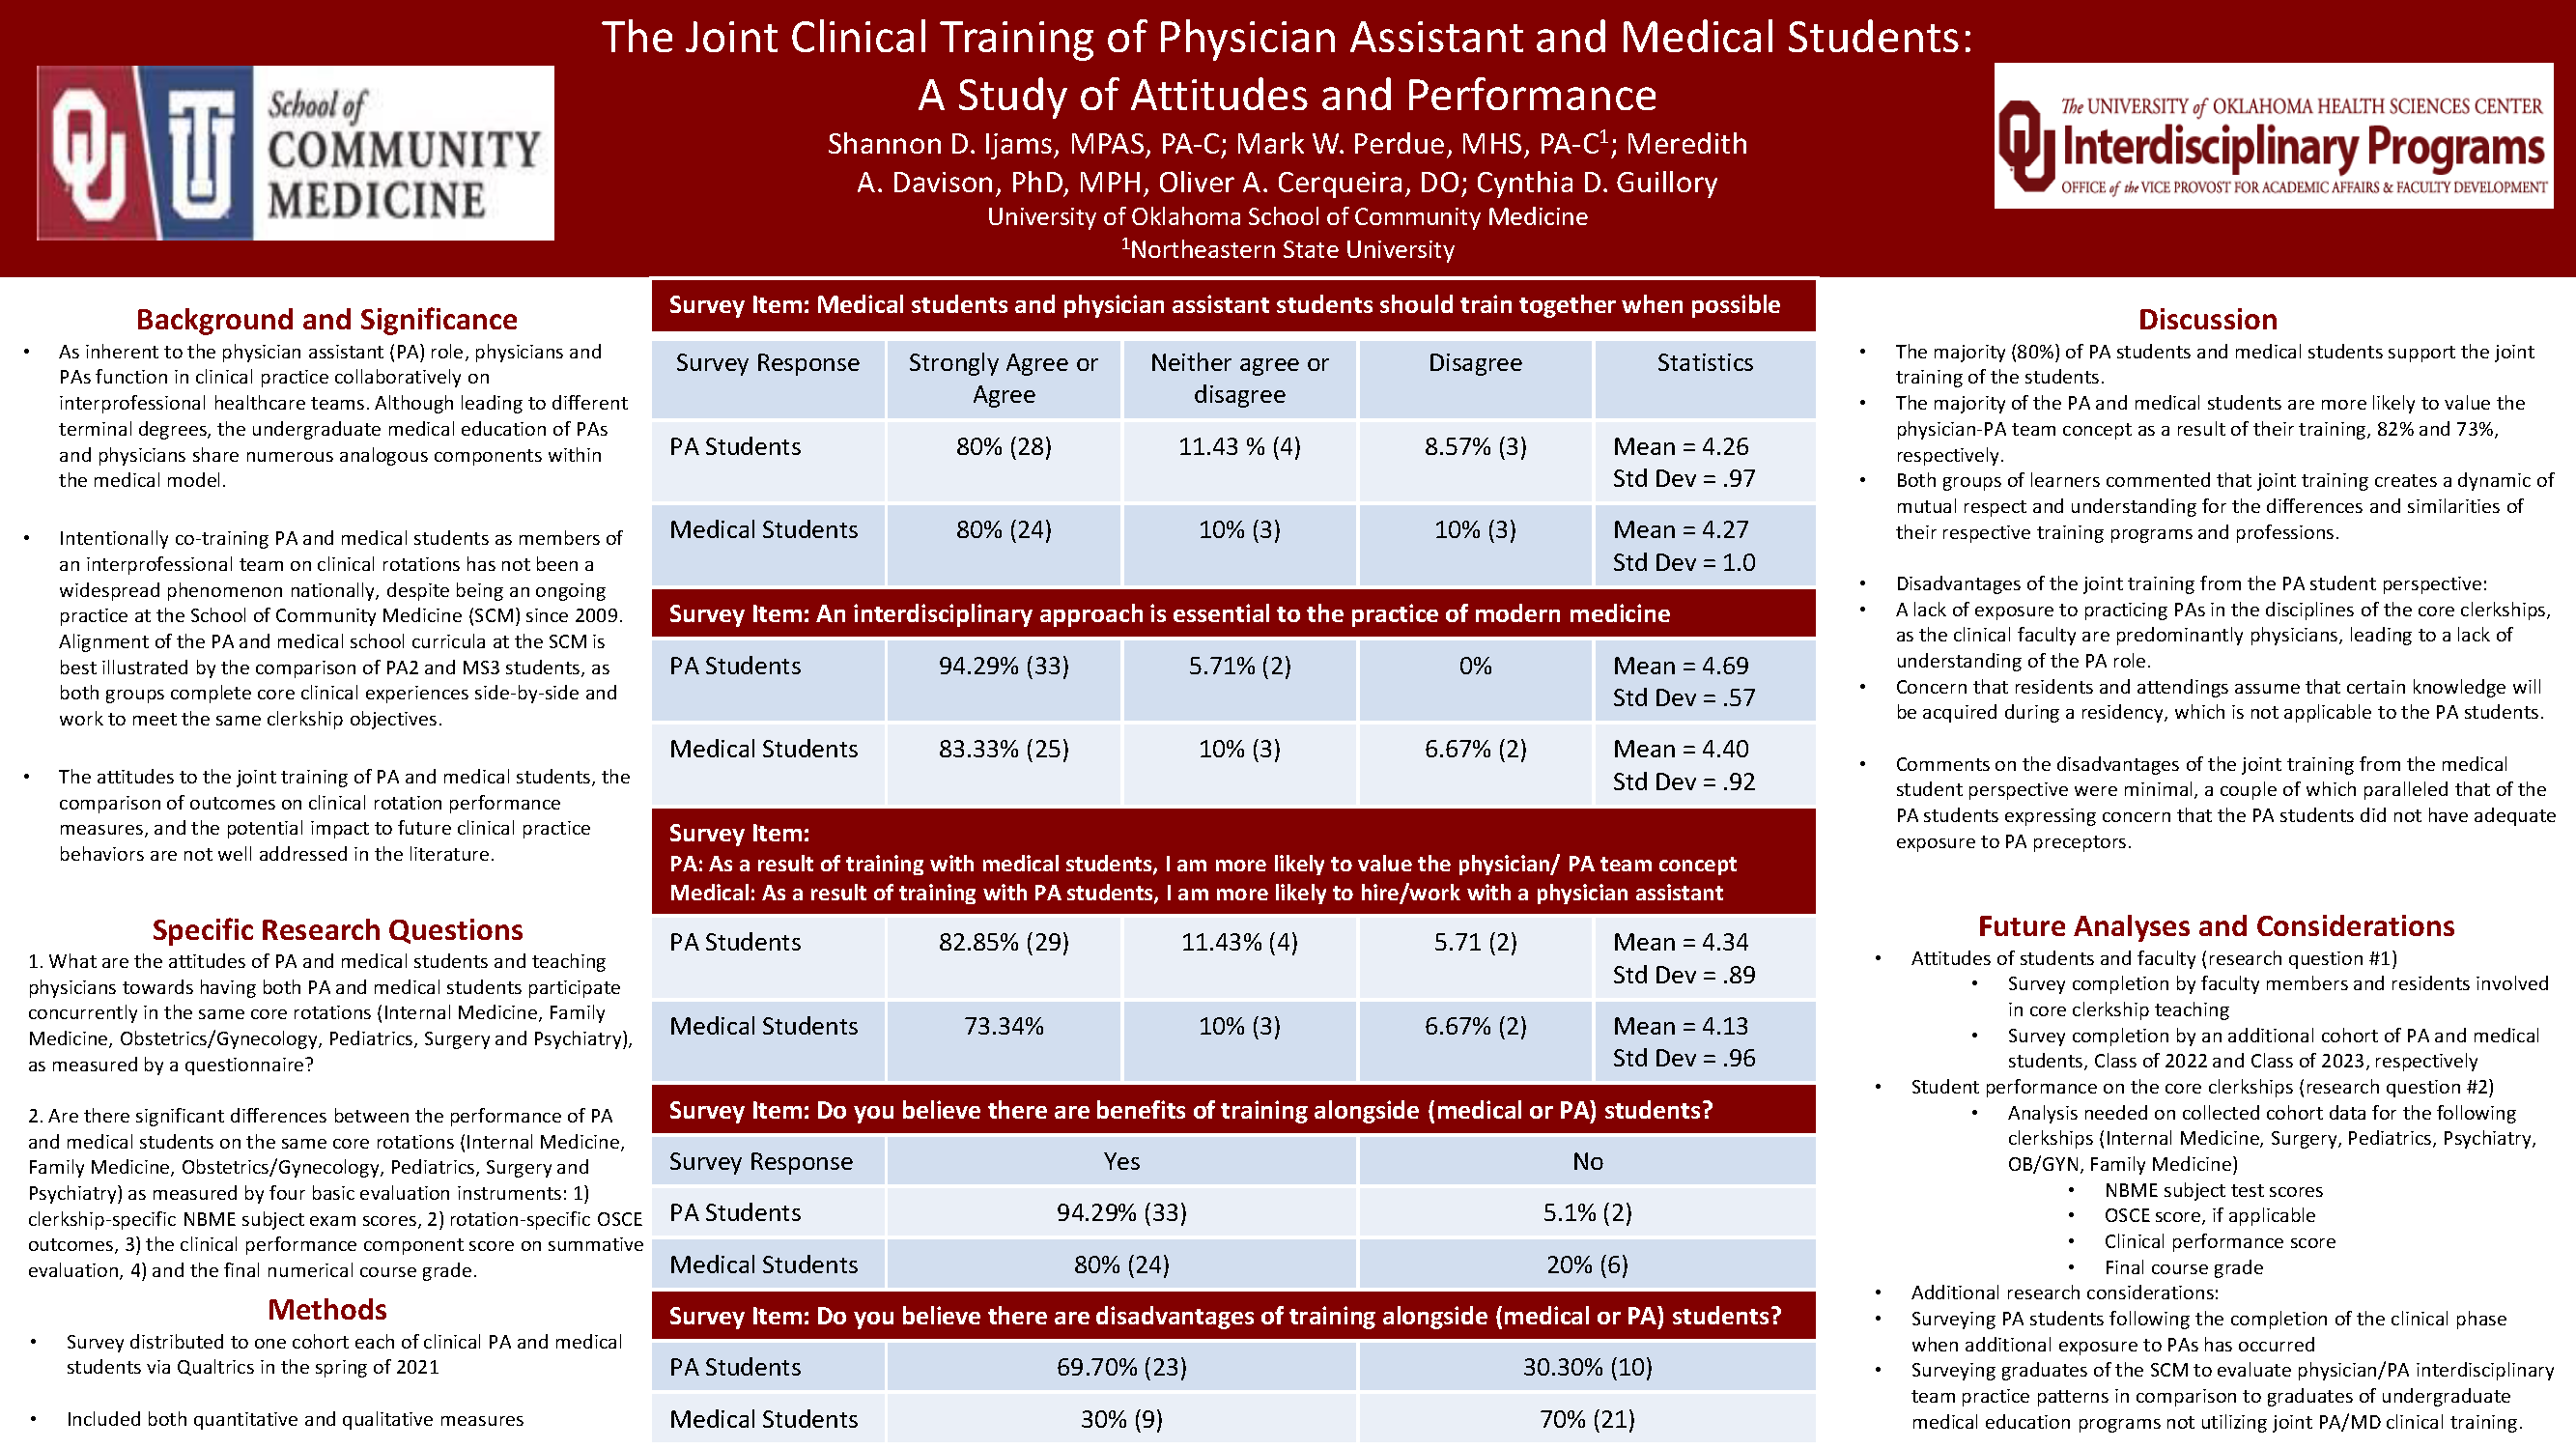 The Joint Clinical Training of Physician Assistant and Medical Students: A Study of Attitudes and Performance Poster